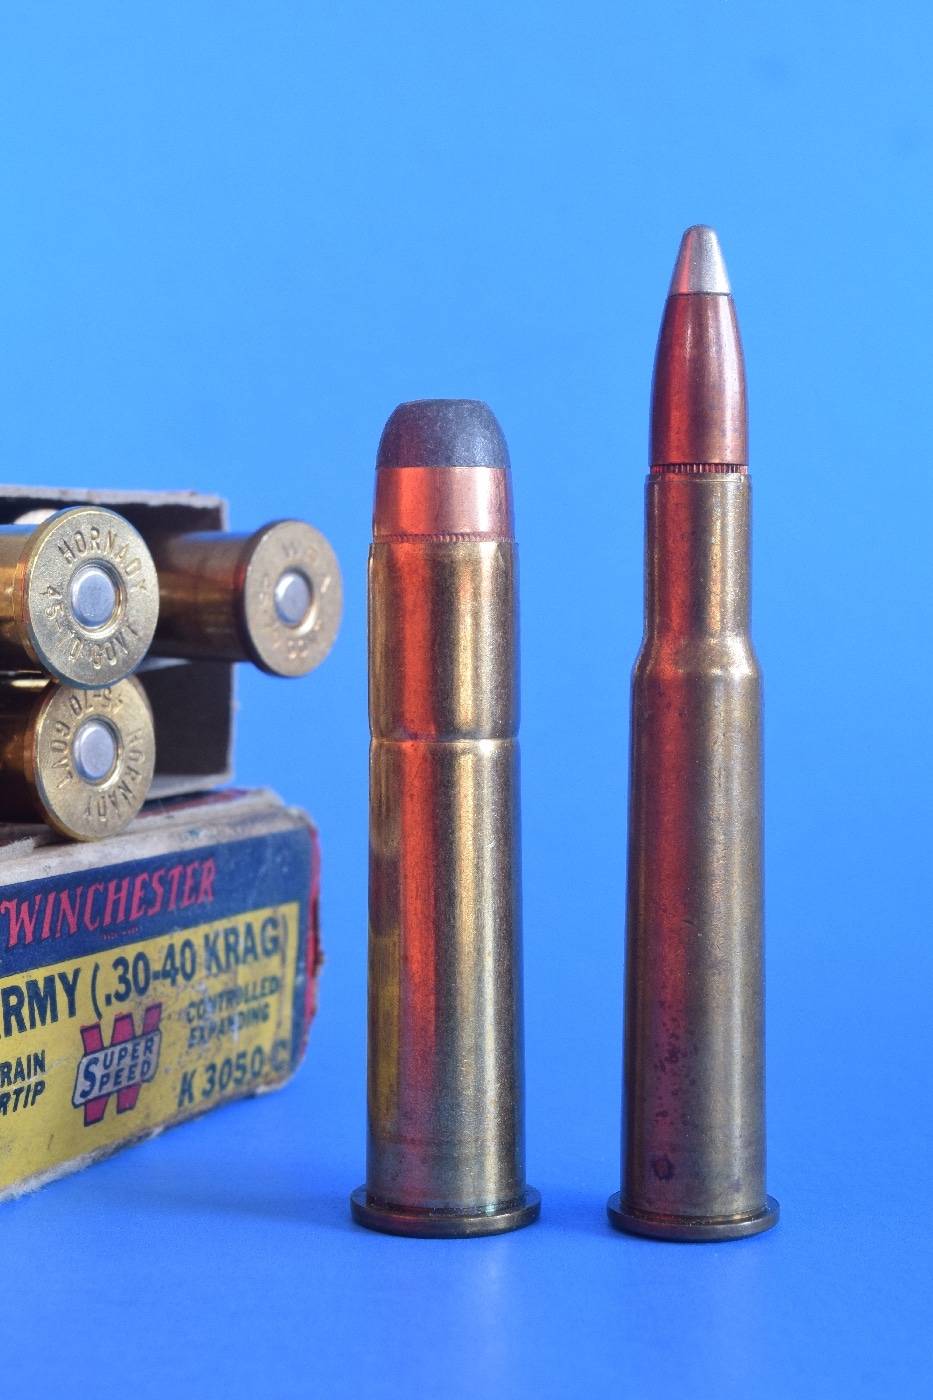 Shown in this photograph is a .30-40 Krag soft point load on the left and a .30-30 Winchester Silvertip load. Silvertip bullets use soft lead and are suitable for self-defense and wild hog hunting due to its stopping power and ballistics. The .30-30 ammo is a rimmed cartridge often used in lever action rifles and handguns. The .30-30 Winchester cartridge was first marketed for the Winchester Model 1894 lever-action rifle in 1895. The .30-30, as it is most commonly known, along with the .25-35 Winchester, was offered that year as the United States' first small-bore sporting rifle cartridges designed for smokeless powder. 